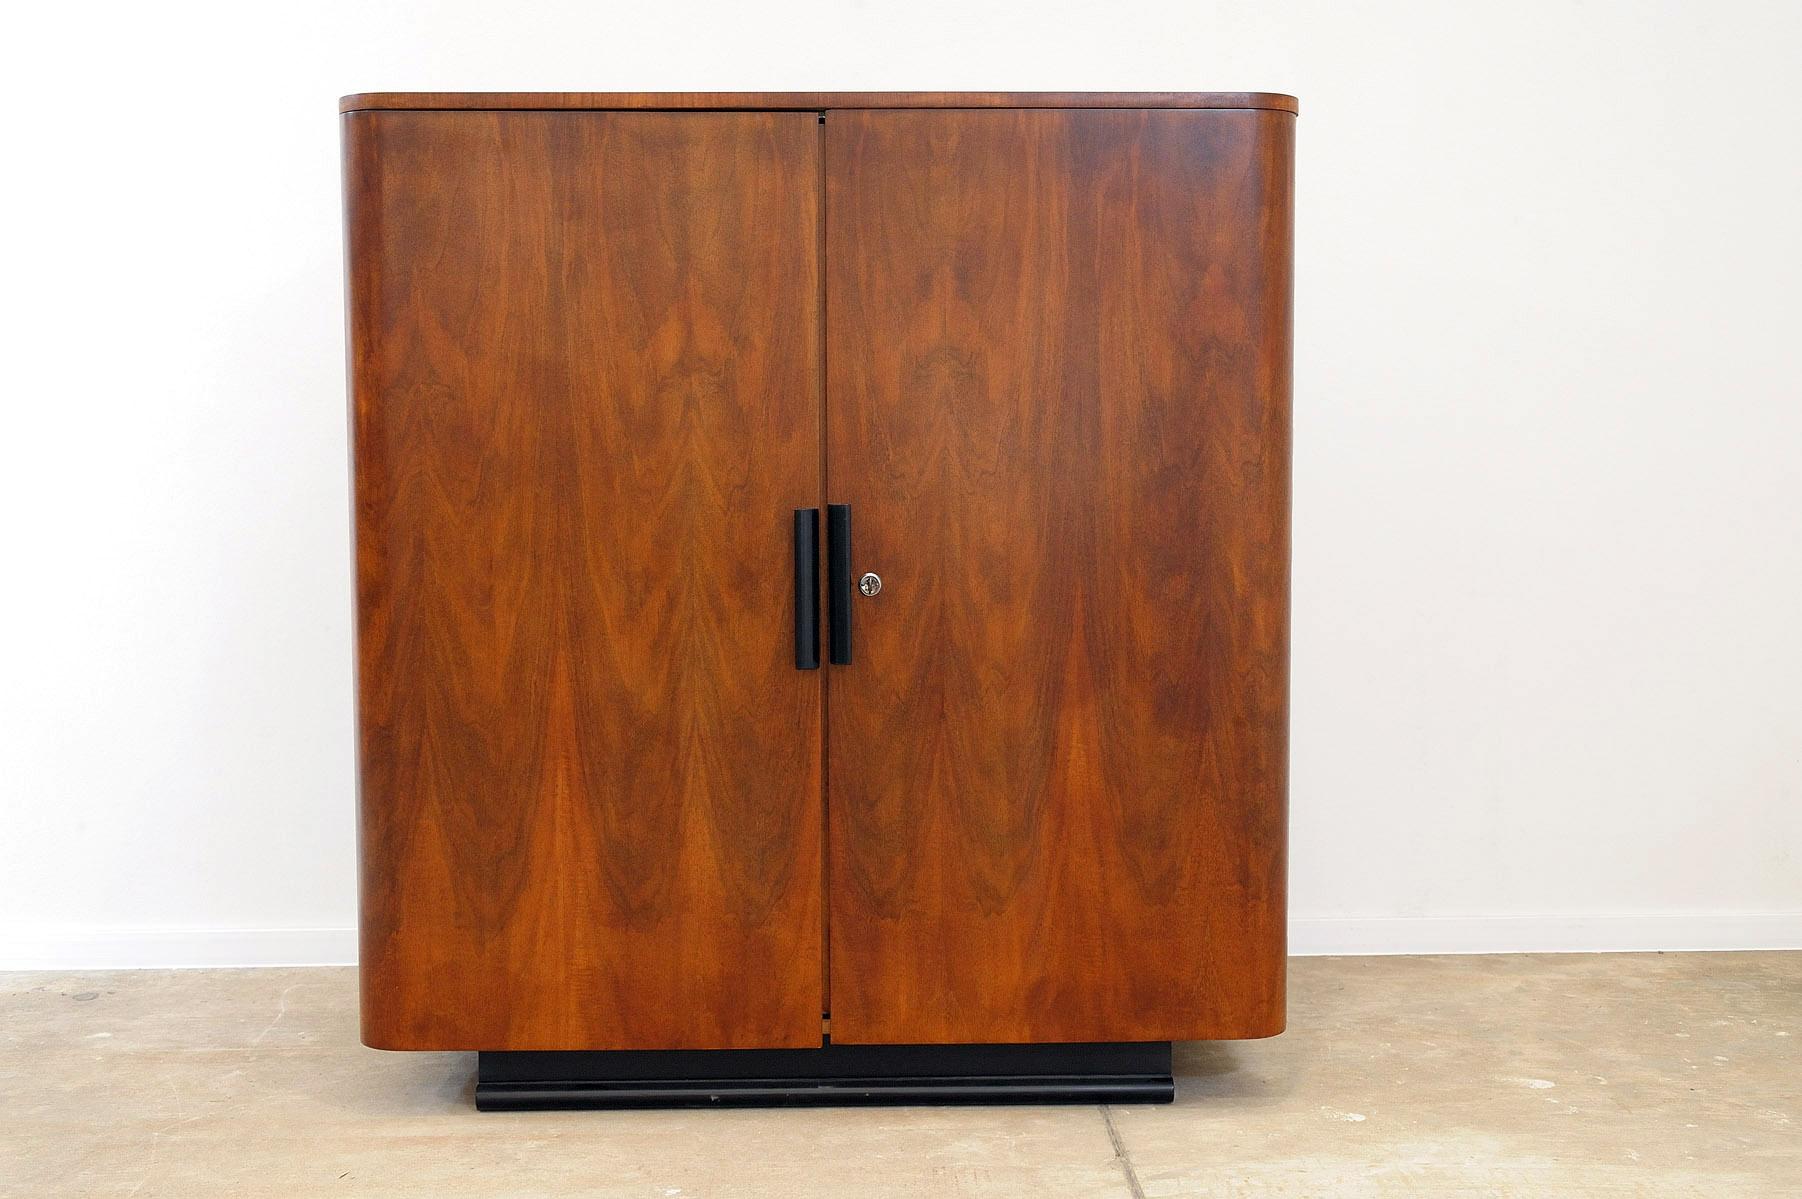 This midcentury walnut cabinet was designed by Jindřich Halabala for UP Závody.

It was part of a complete bedroom suite by UP Závody. It was made in the former Czechoslovakia in 1952.

Very simple design.

It´s in excellent condition, fully